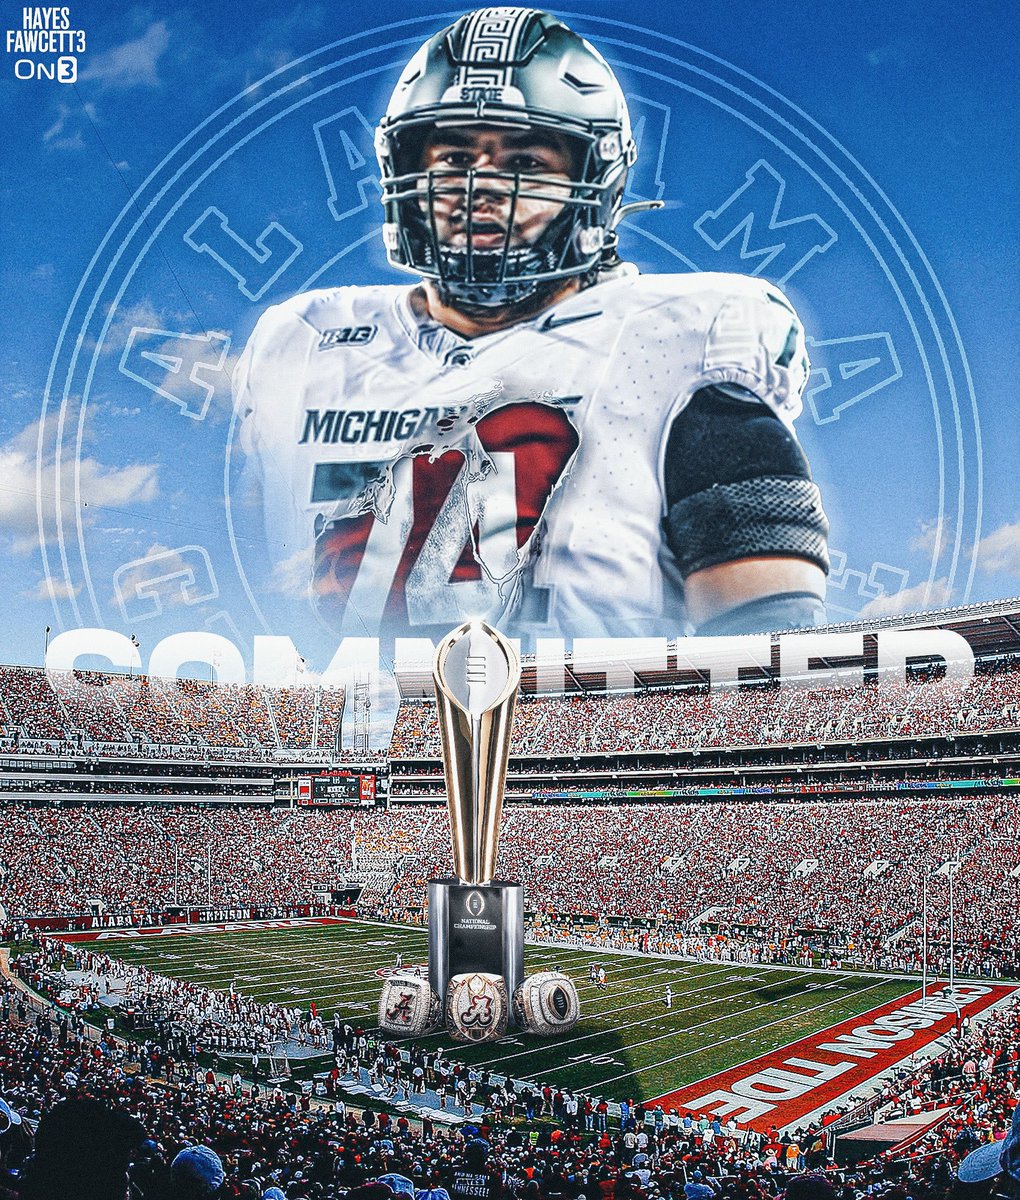 BREAKING: Former Michigan State OL Geno VanDeMark has Committed to Alabama, he tells @on3sports The 6’5 320 OL will have 2 years of eligibility remaining Played in 18 games for the Spartans on3.com/db/geno-vandem…